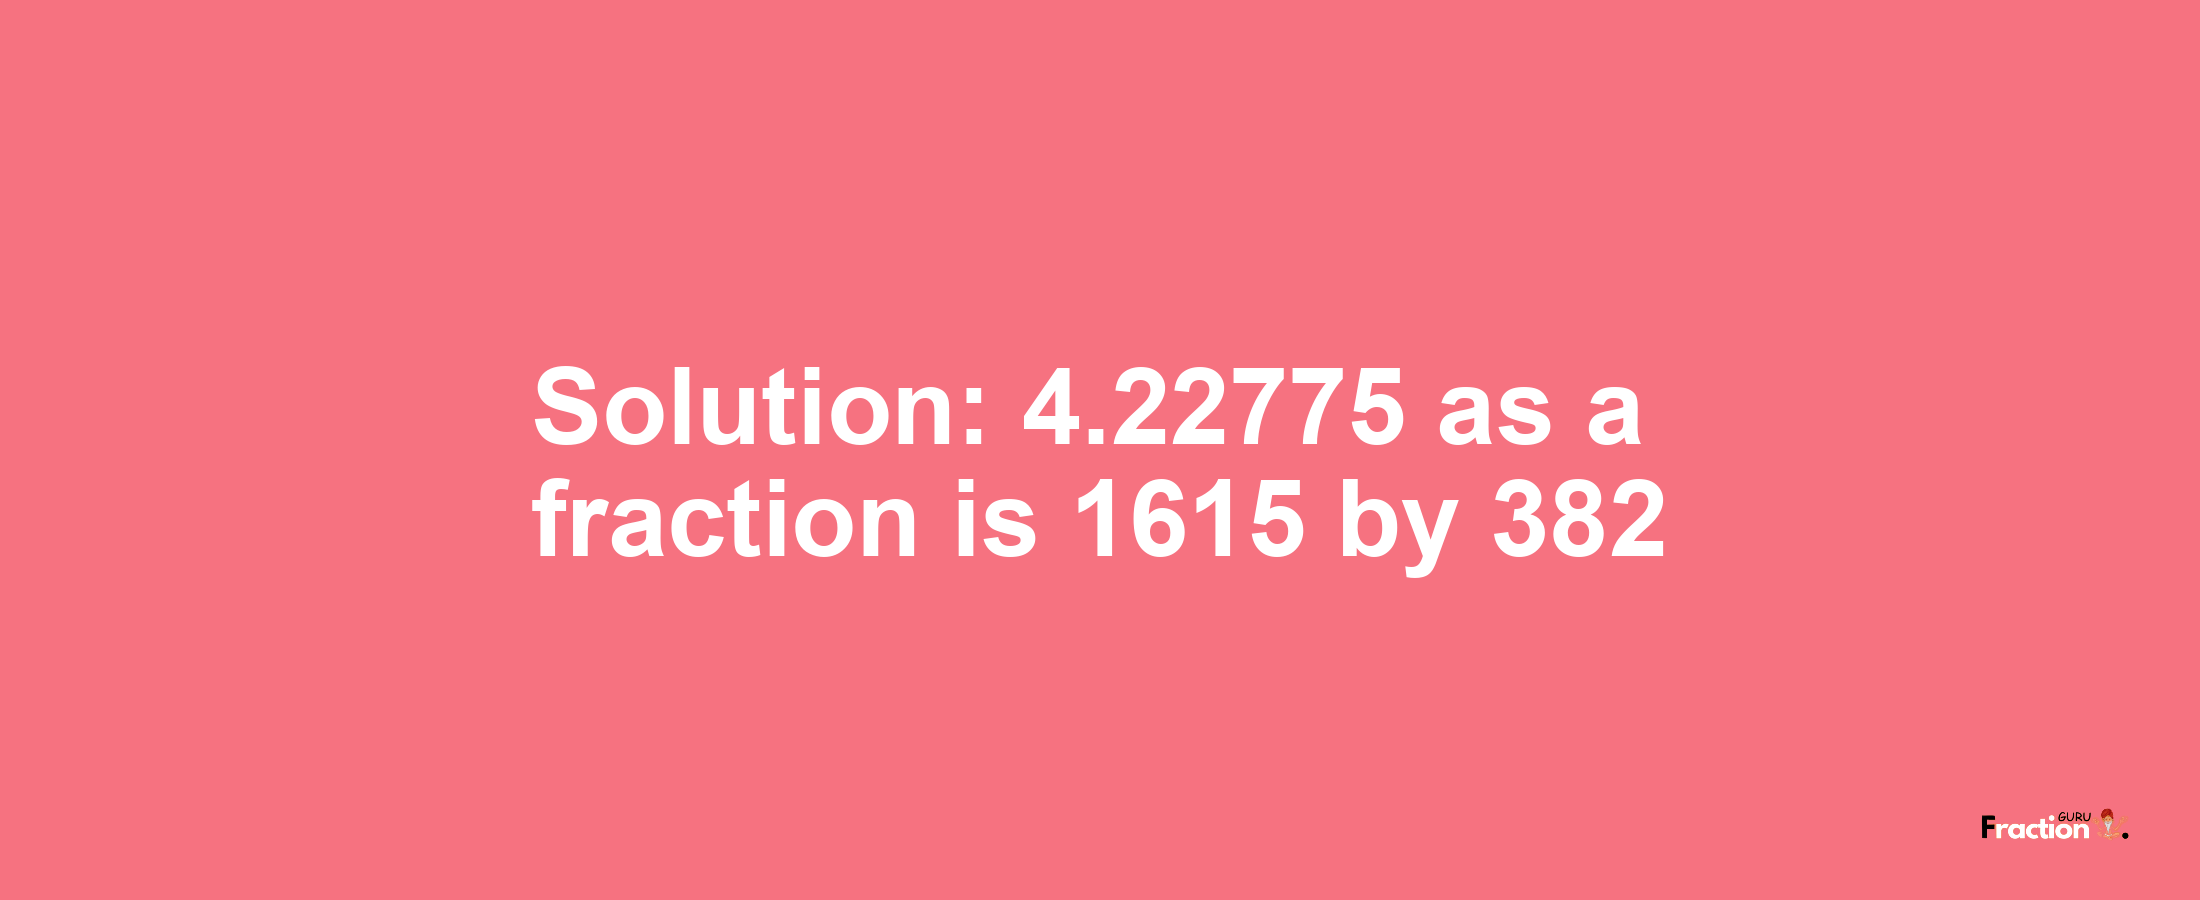 Solution:4.22775 as a fraction is 1615/382